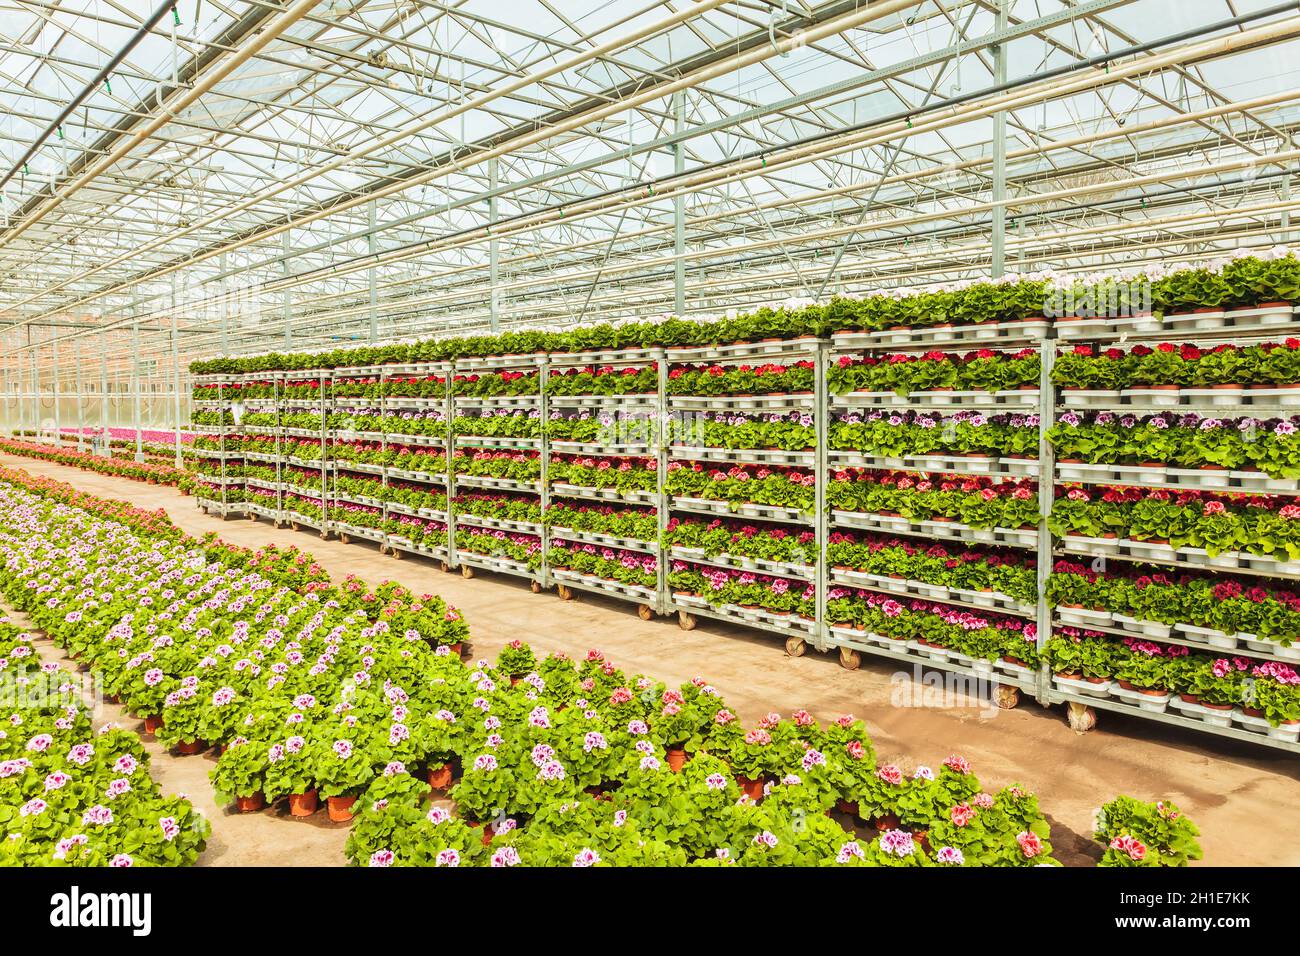 Crates with Dutch geranium plants in a greenhouse ready for export Stock Photo